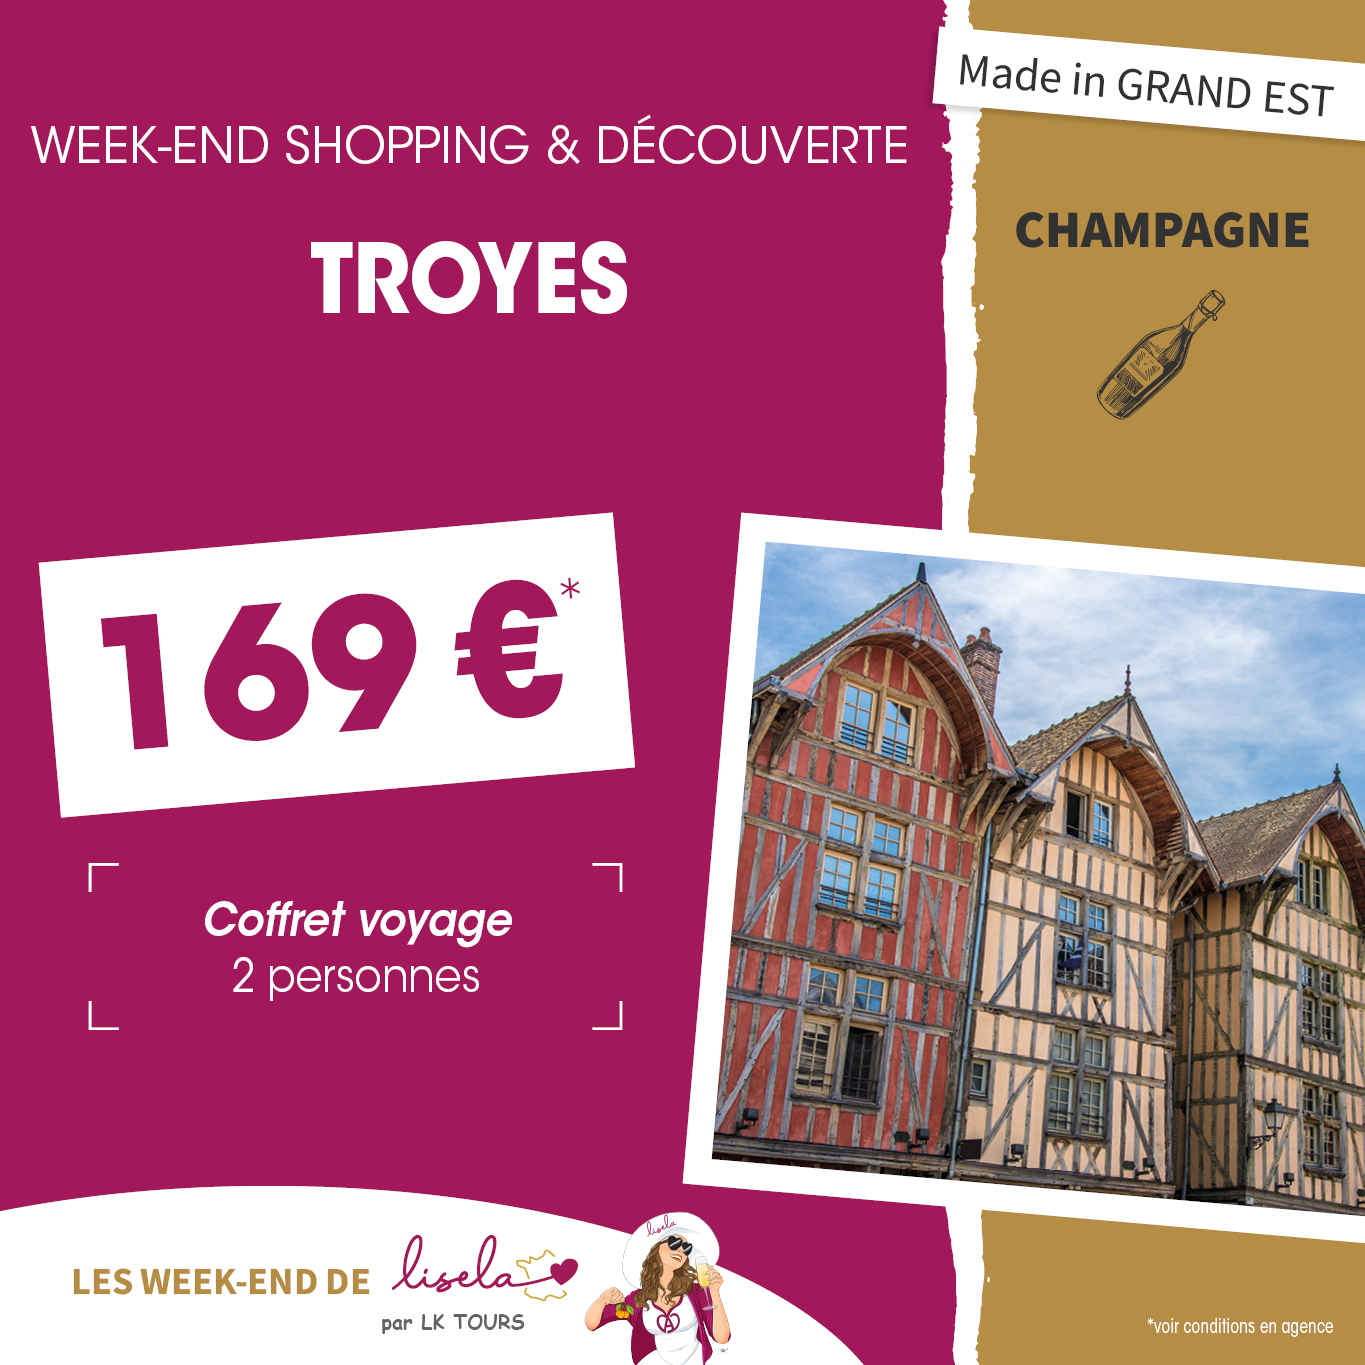 WEEK-END SHOPPING & DÉCOUVERTE TROYES